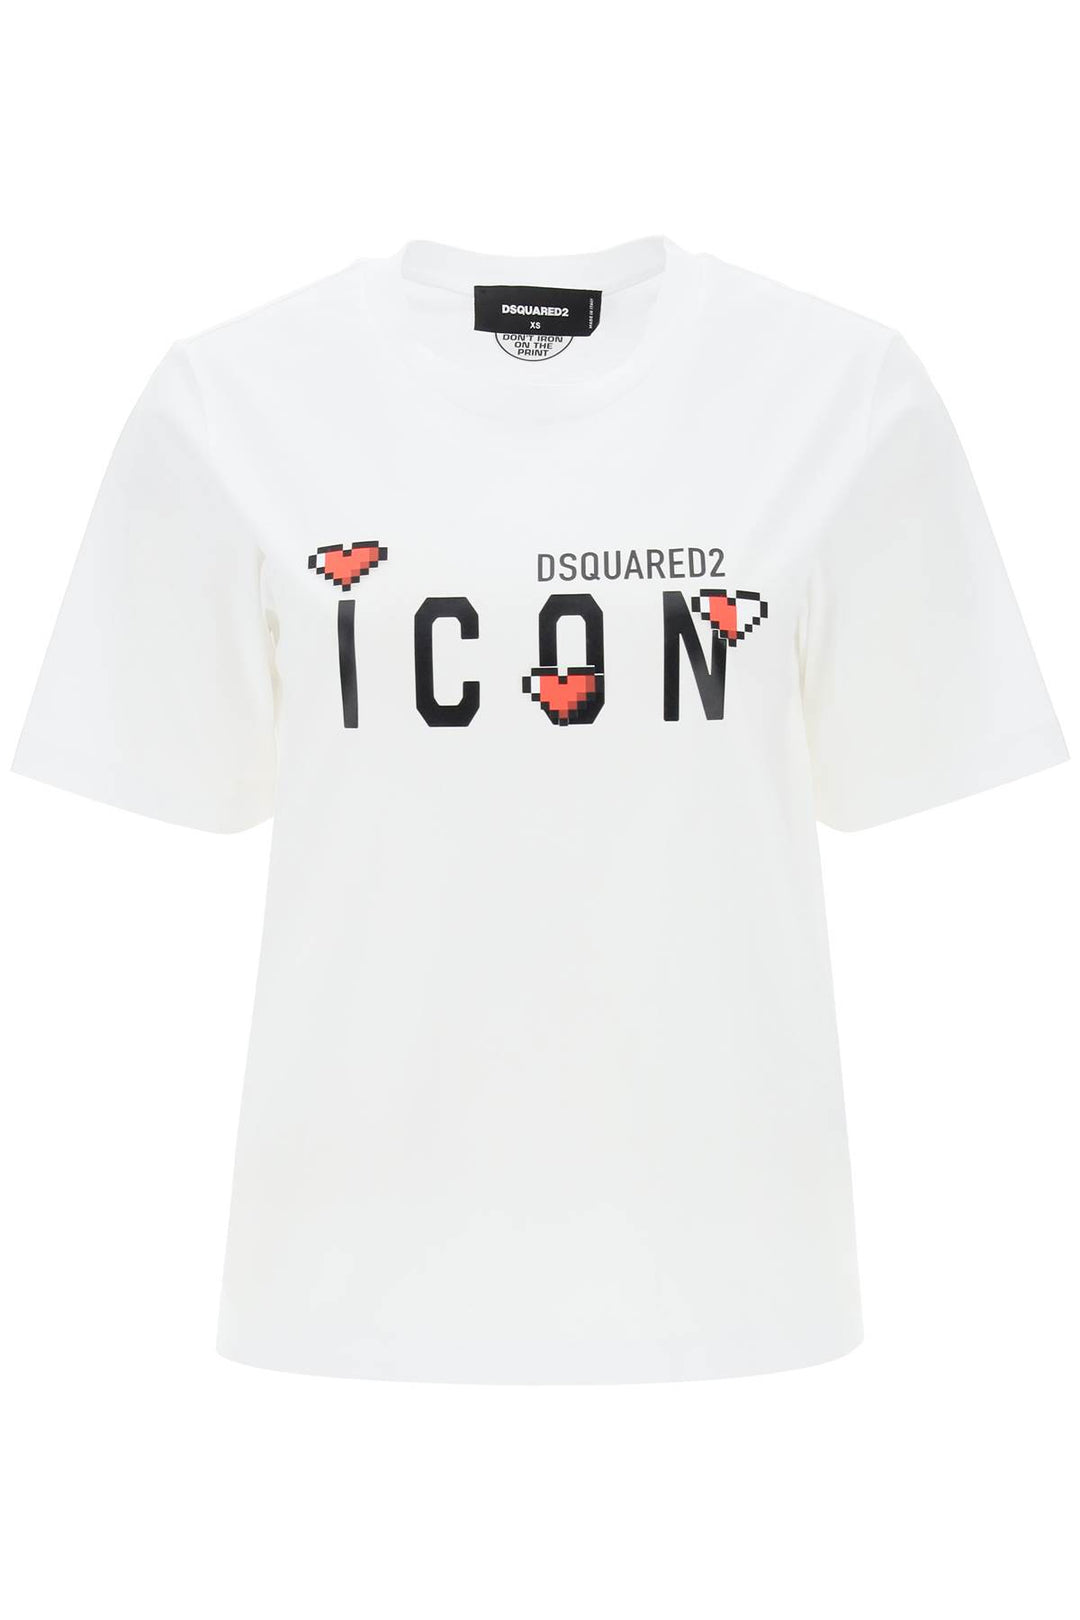 T Shirt 'Icon Game Lover' - Dsquared2 - Donna